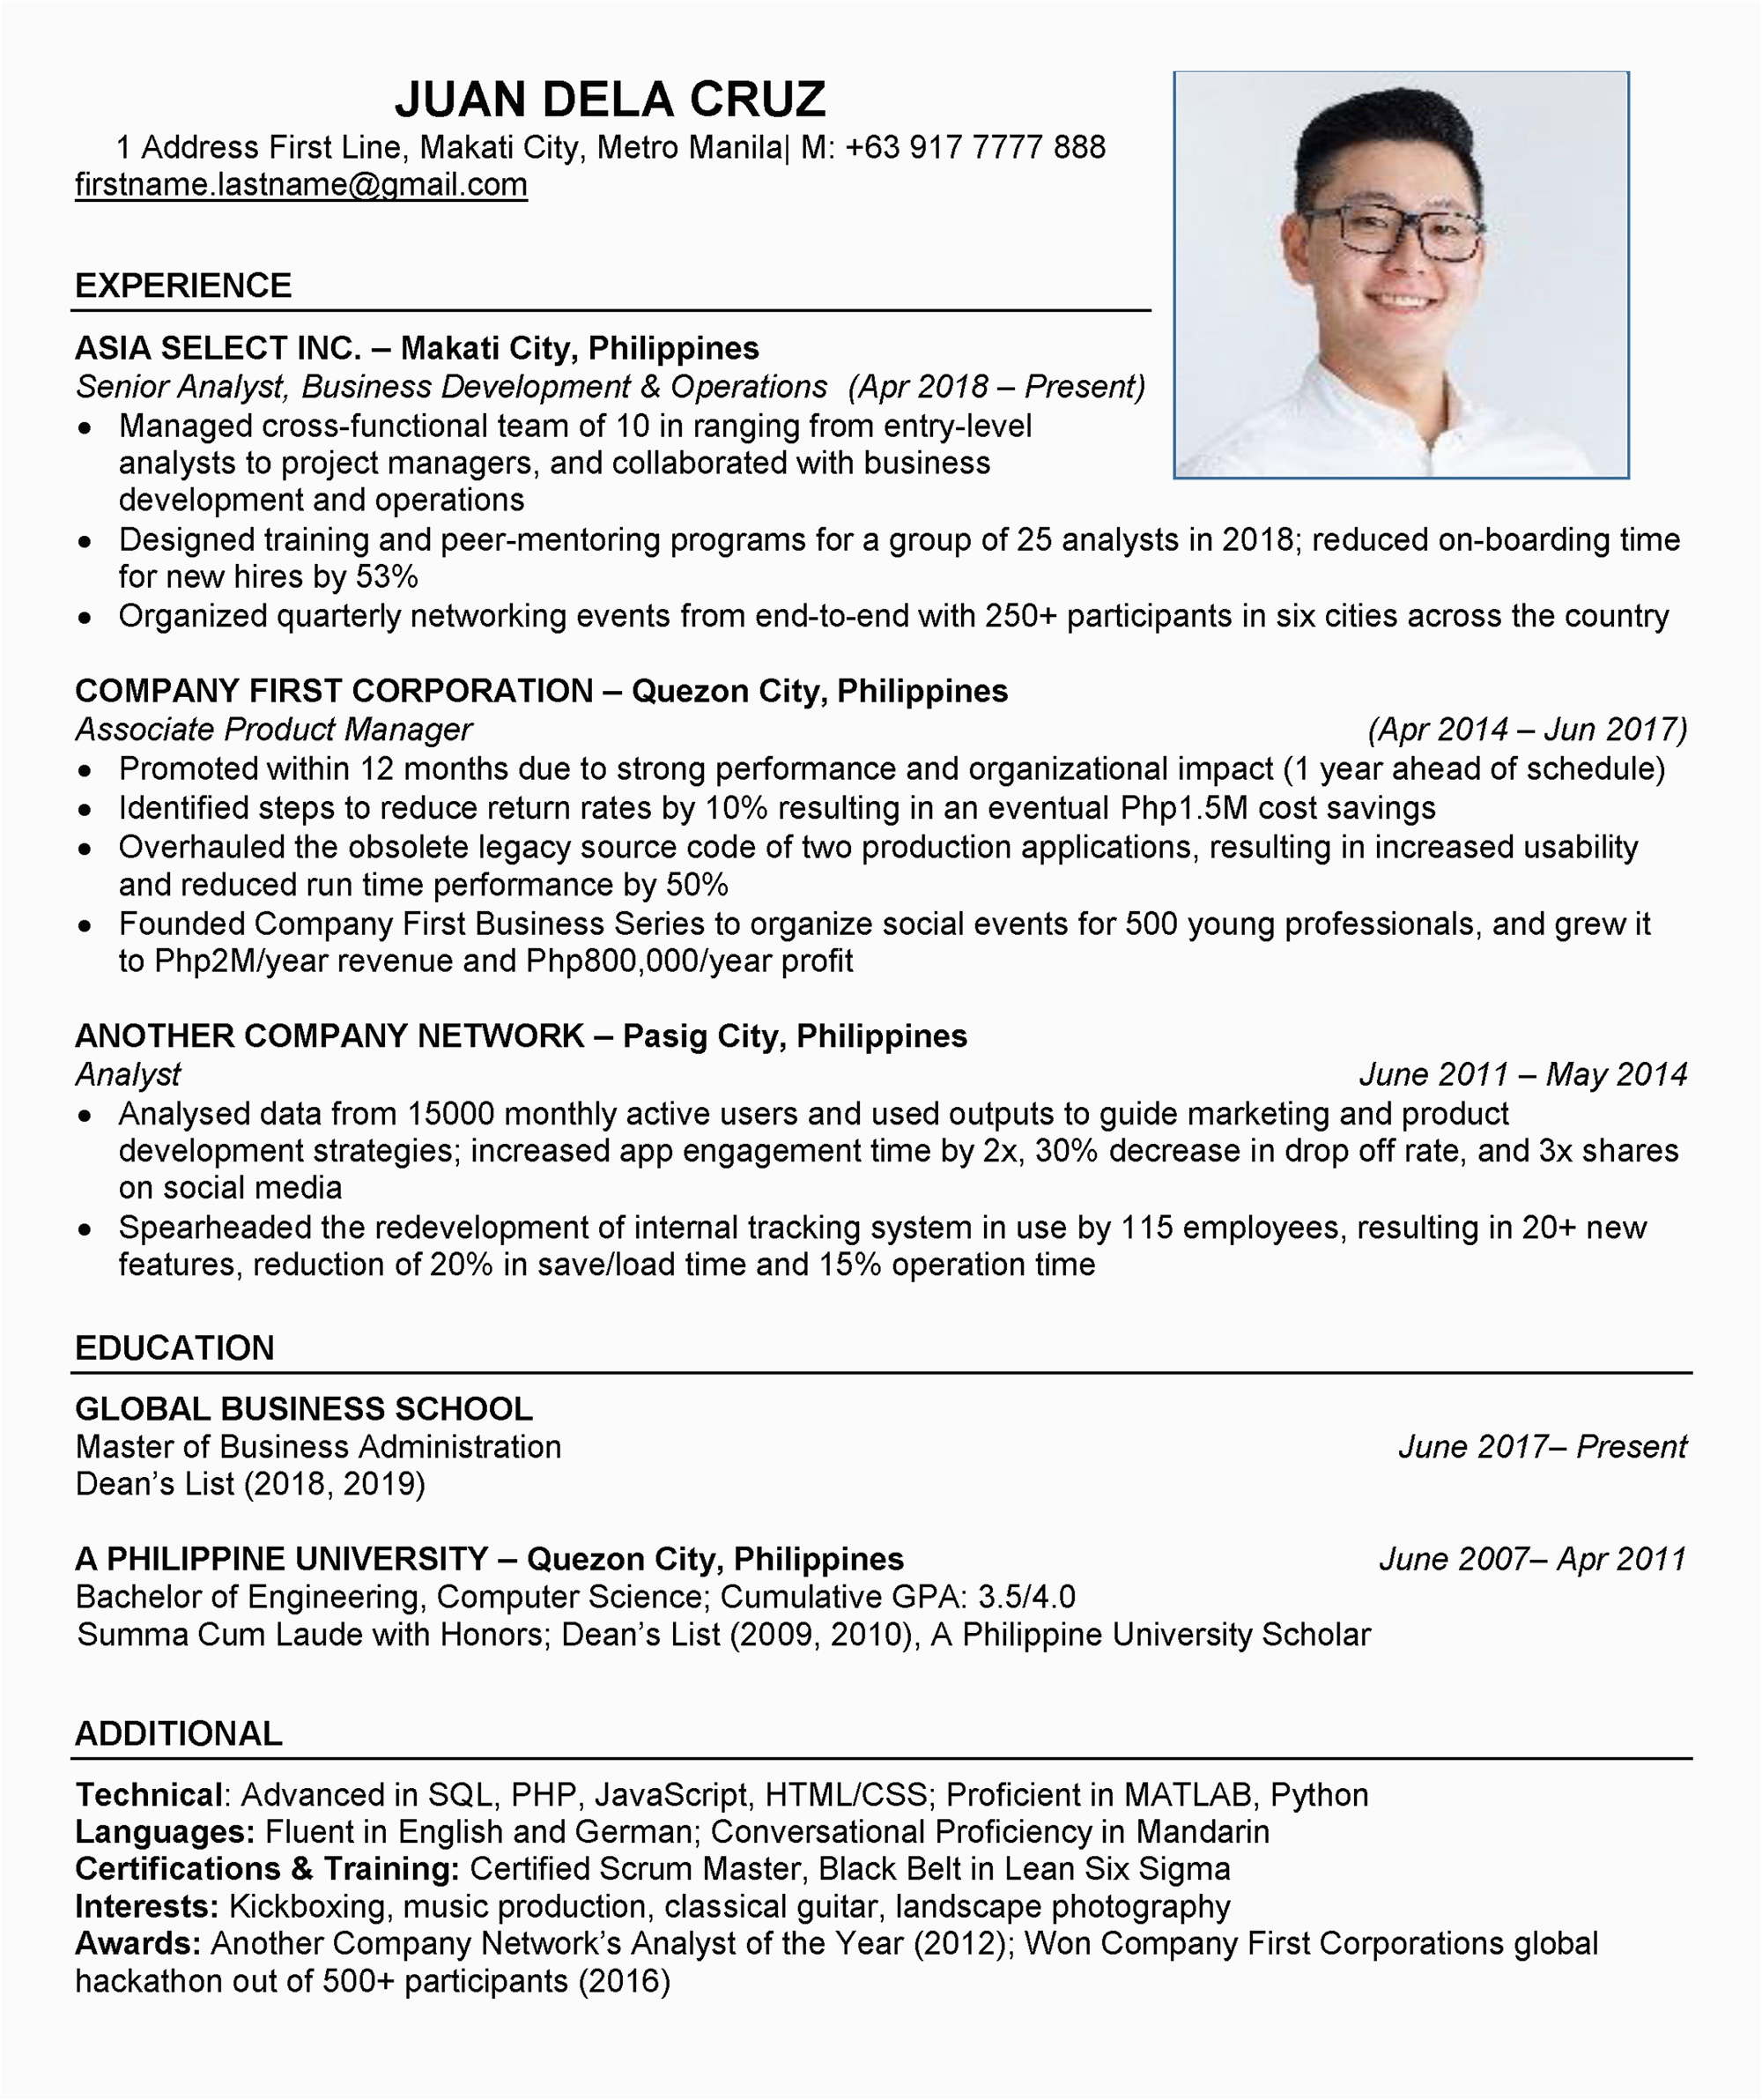 Possess A Meticulous Eye Sample Resume How to Make A Pro Resume Based ats format